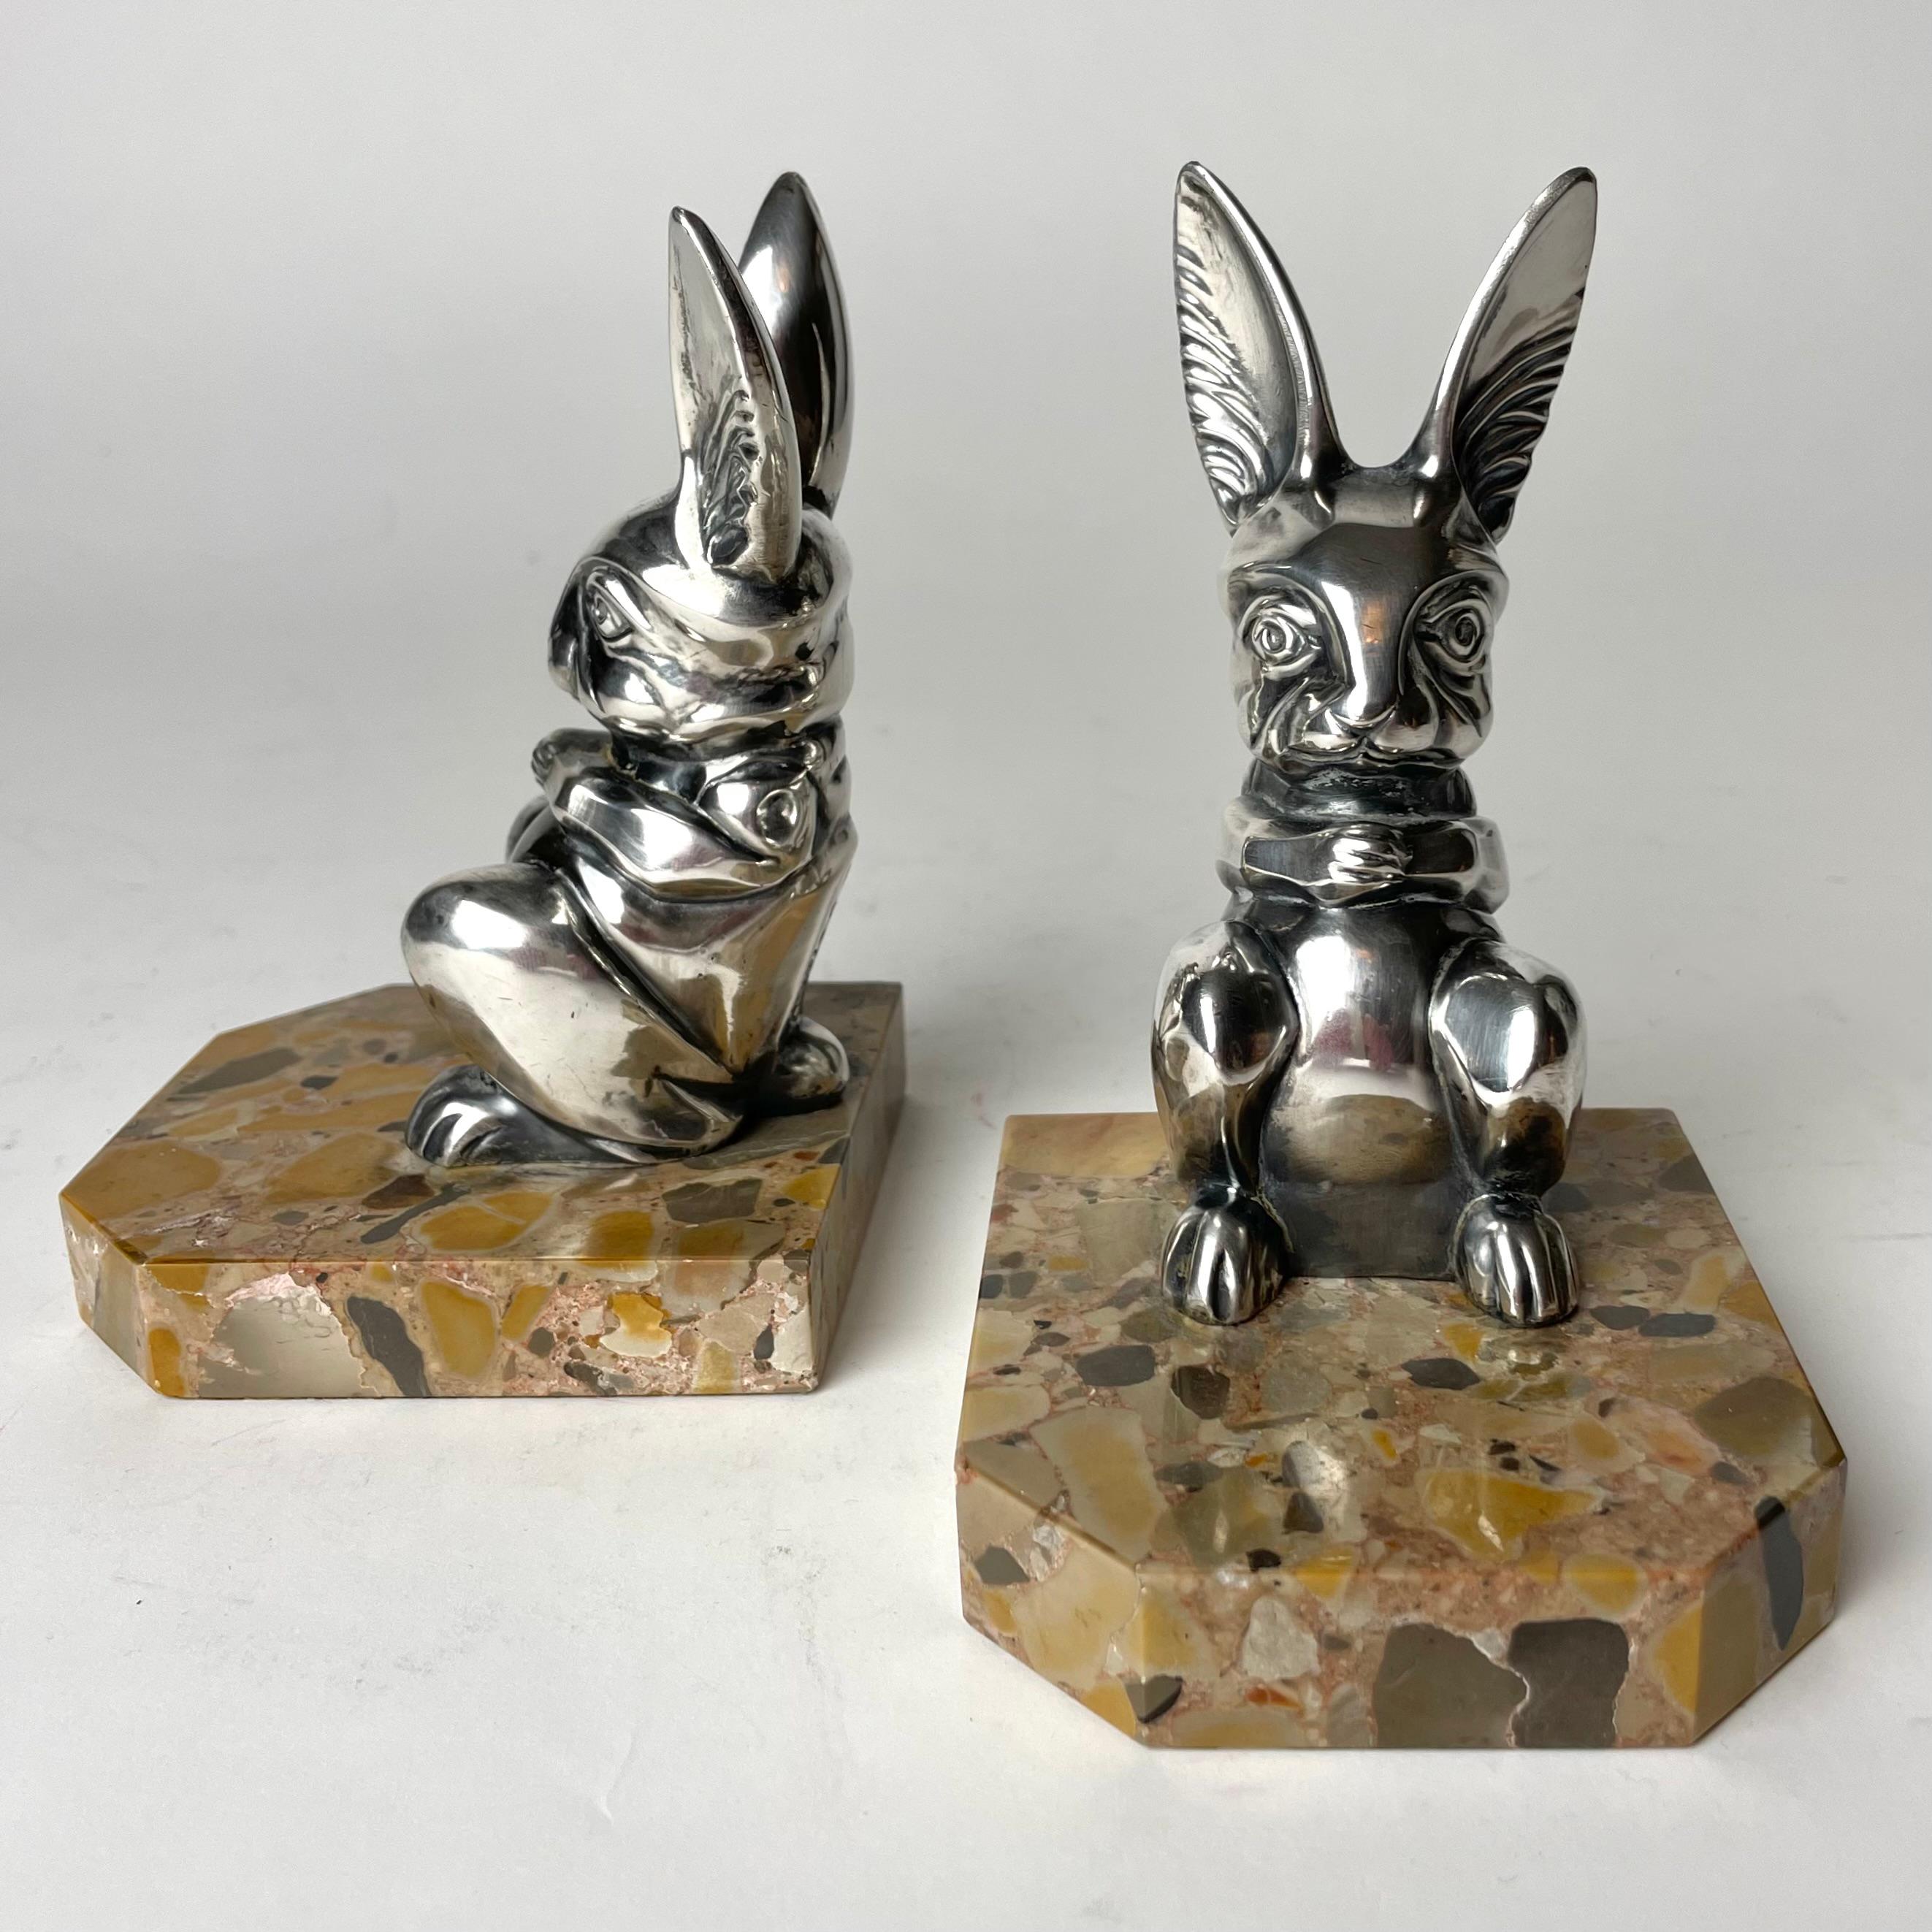 A pair of Cool Art Deco bookends from the 1920s by Hippolyte Moreau In Good Condition For Sale In Knivsta, SE